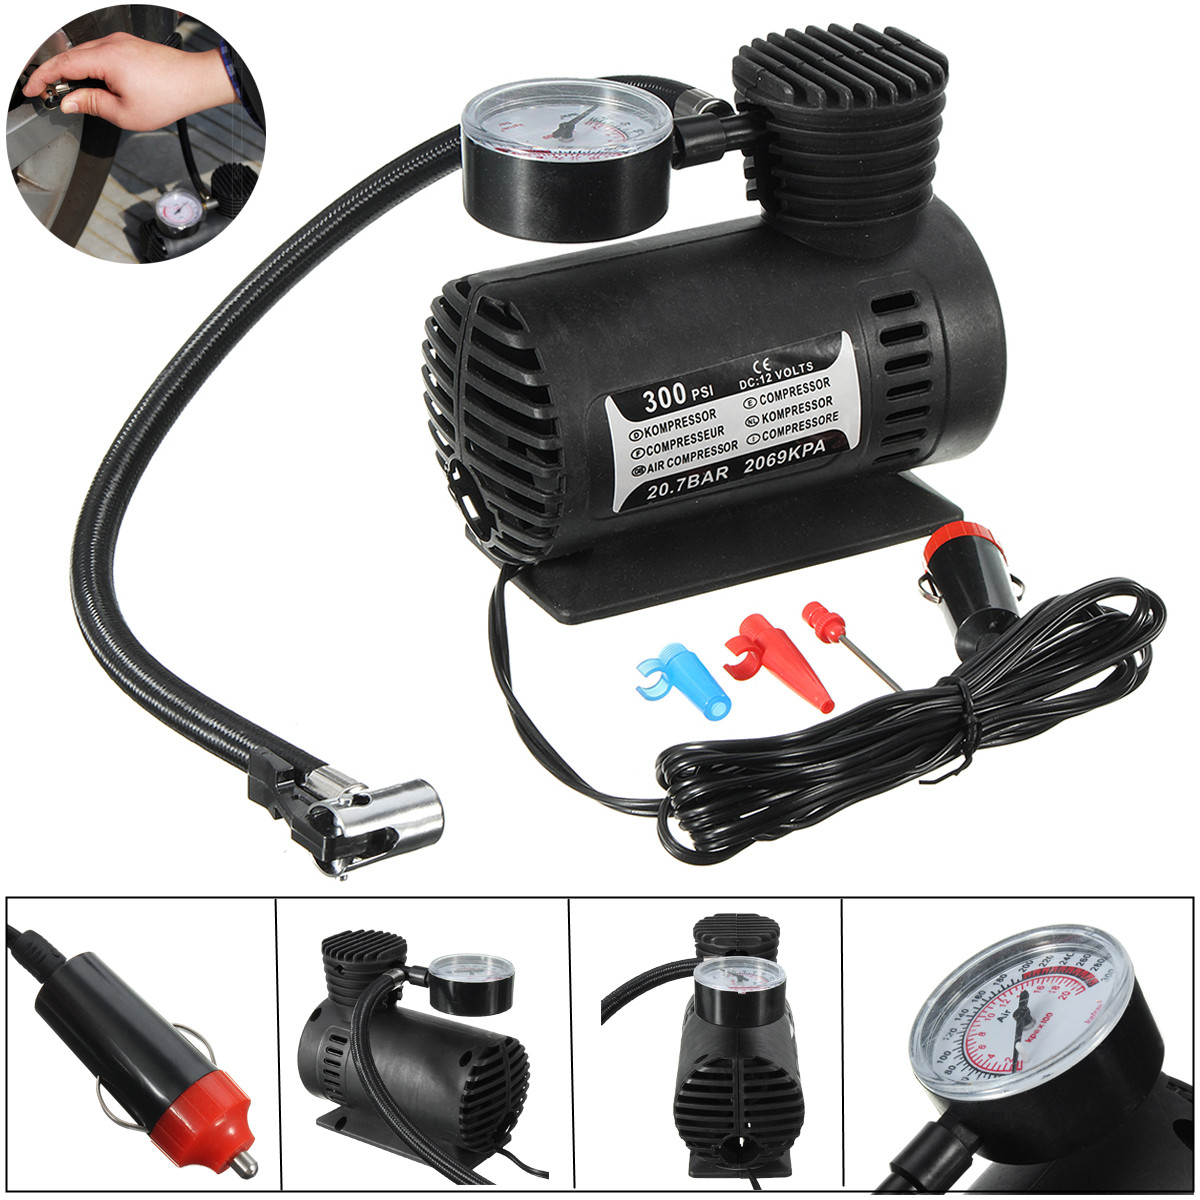 DC-12V-300PSI-Car-Air-Compressor-Portable-Tire-Inflator-Air-Pump-For-Motorcycle-Car-Auto-Bicycle-1715750-6